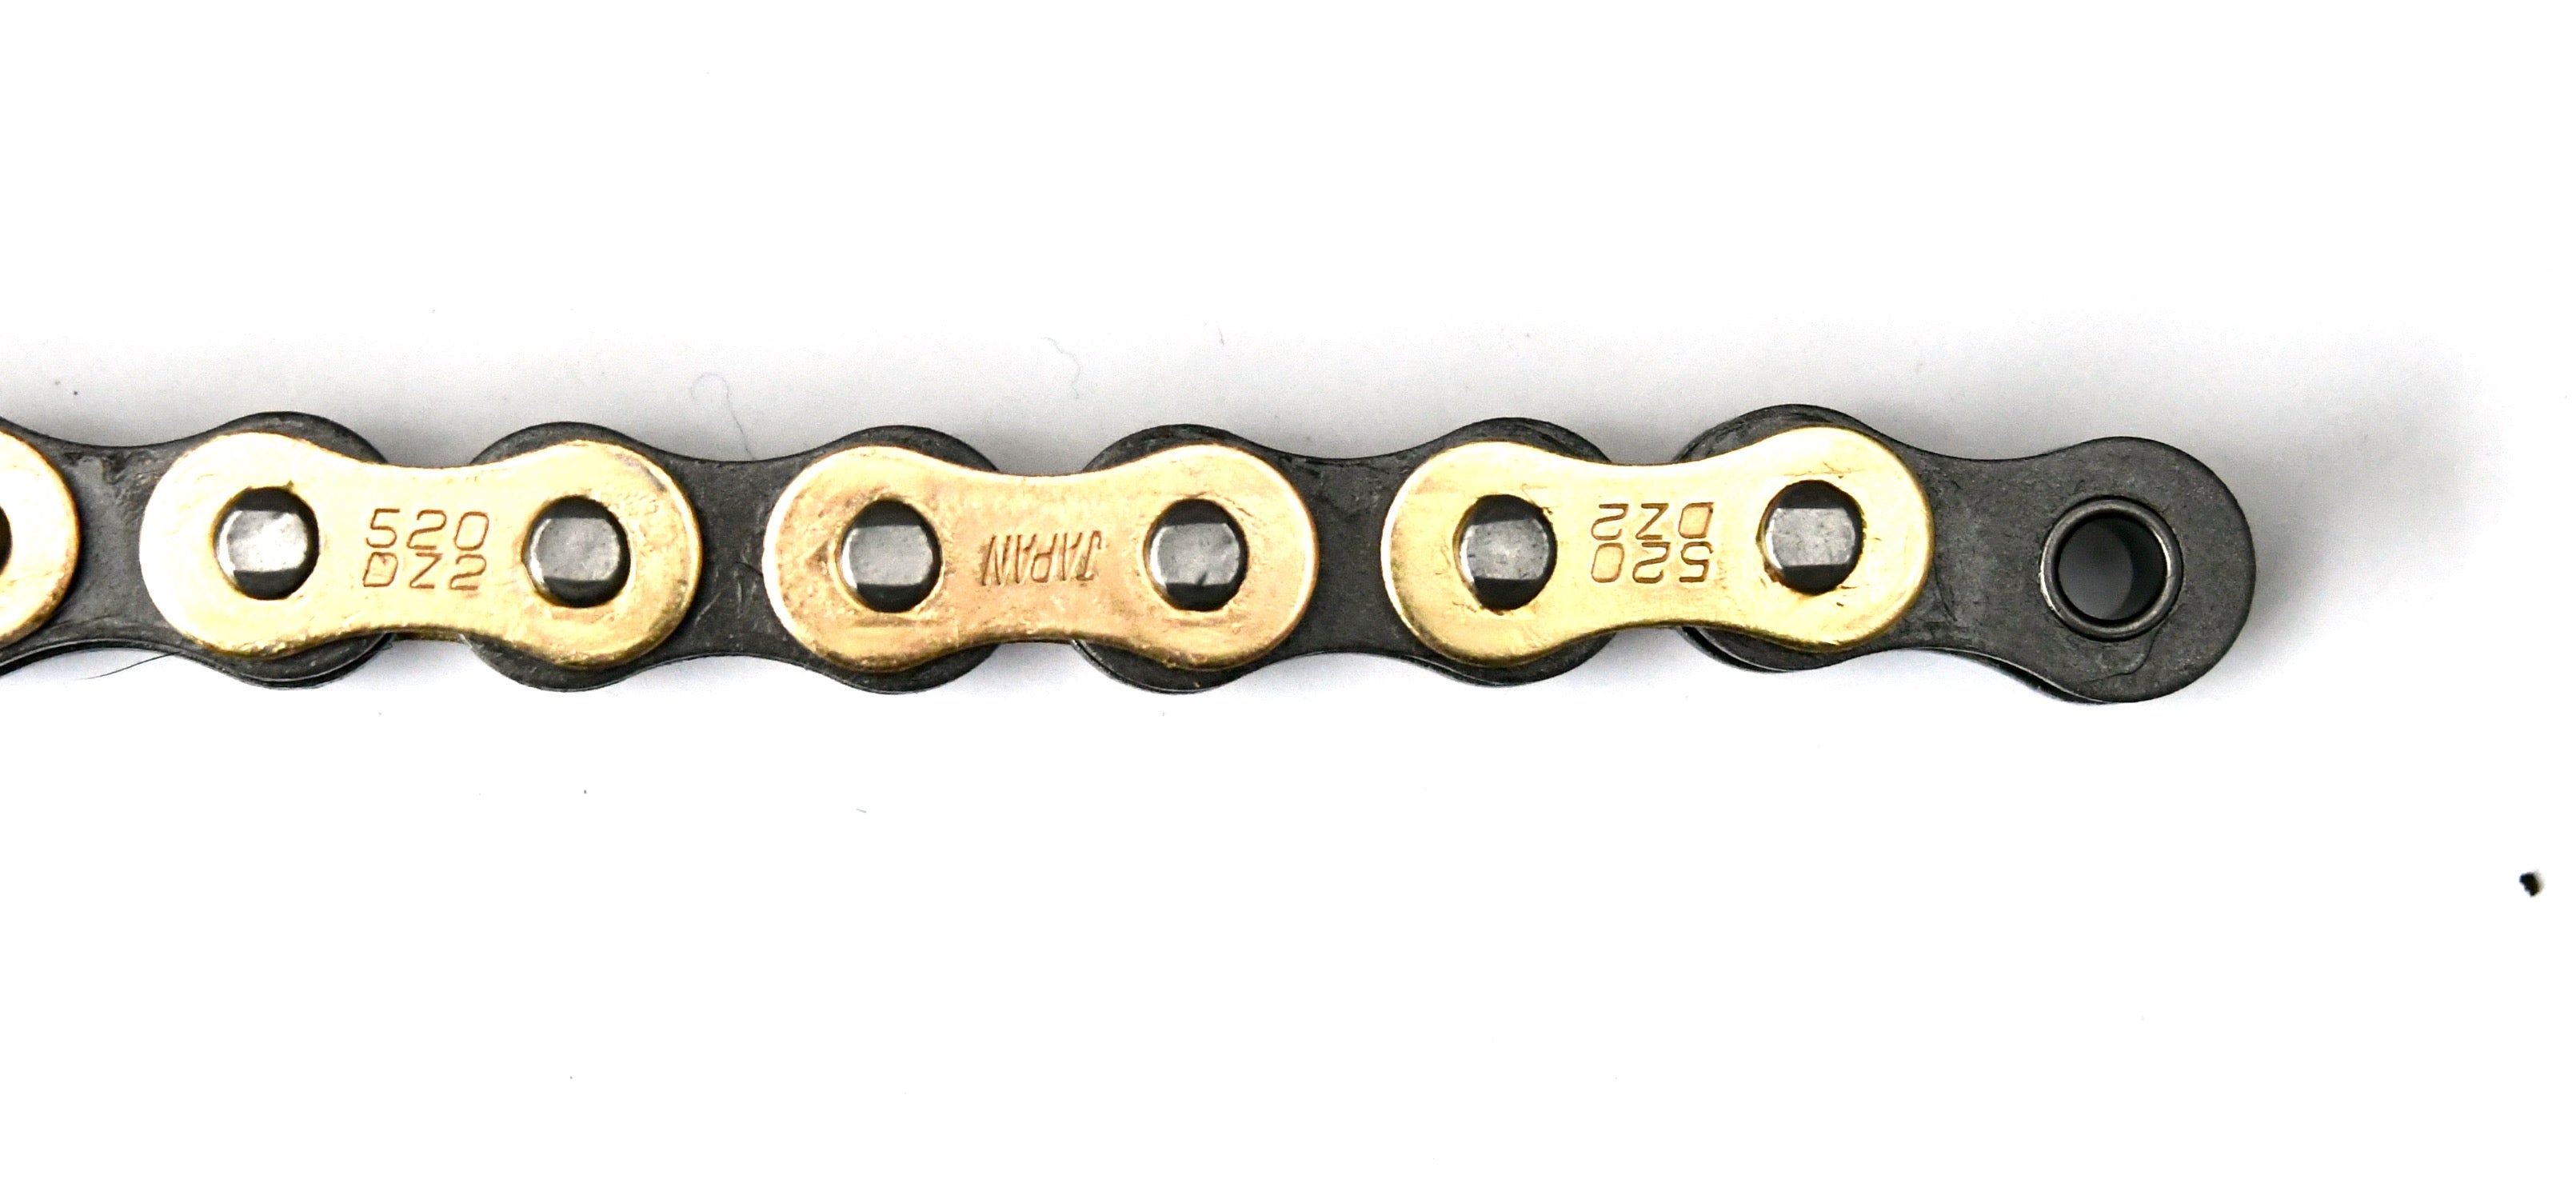 DID 520 DZ2 Off Road Chain 120 Links - Gold